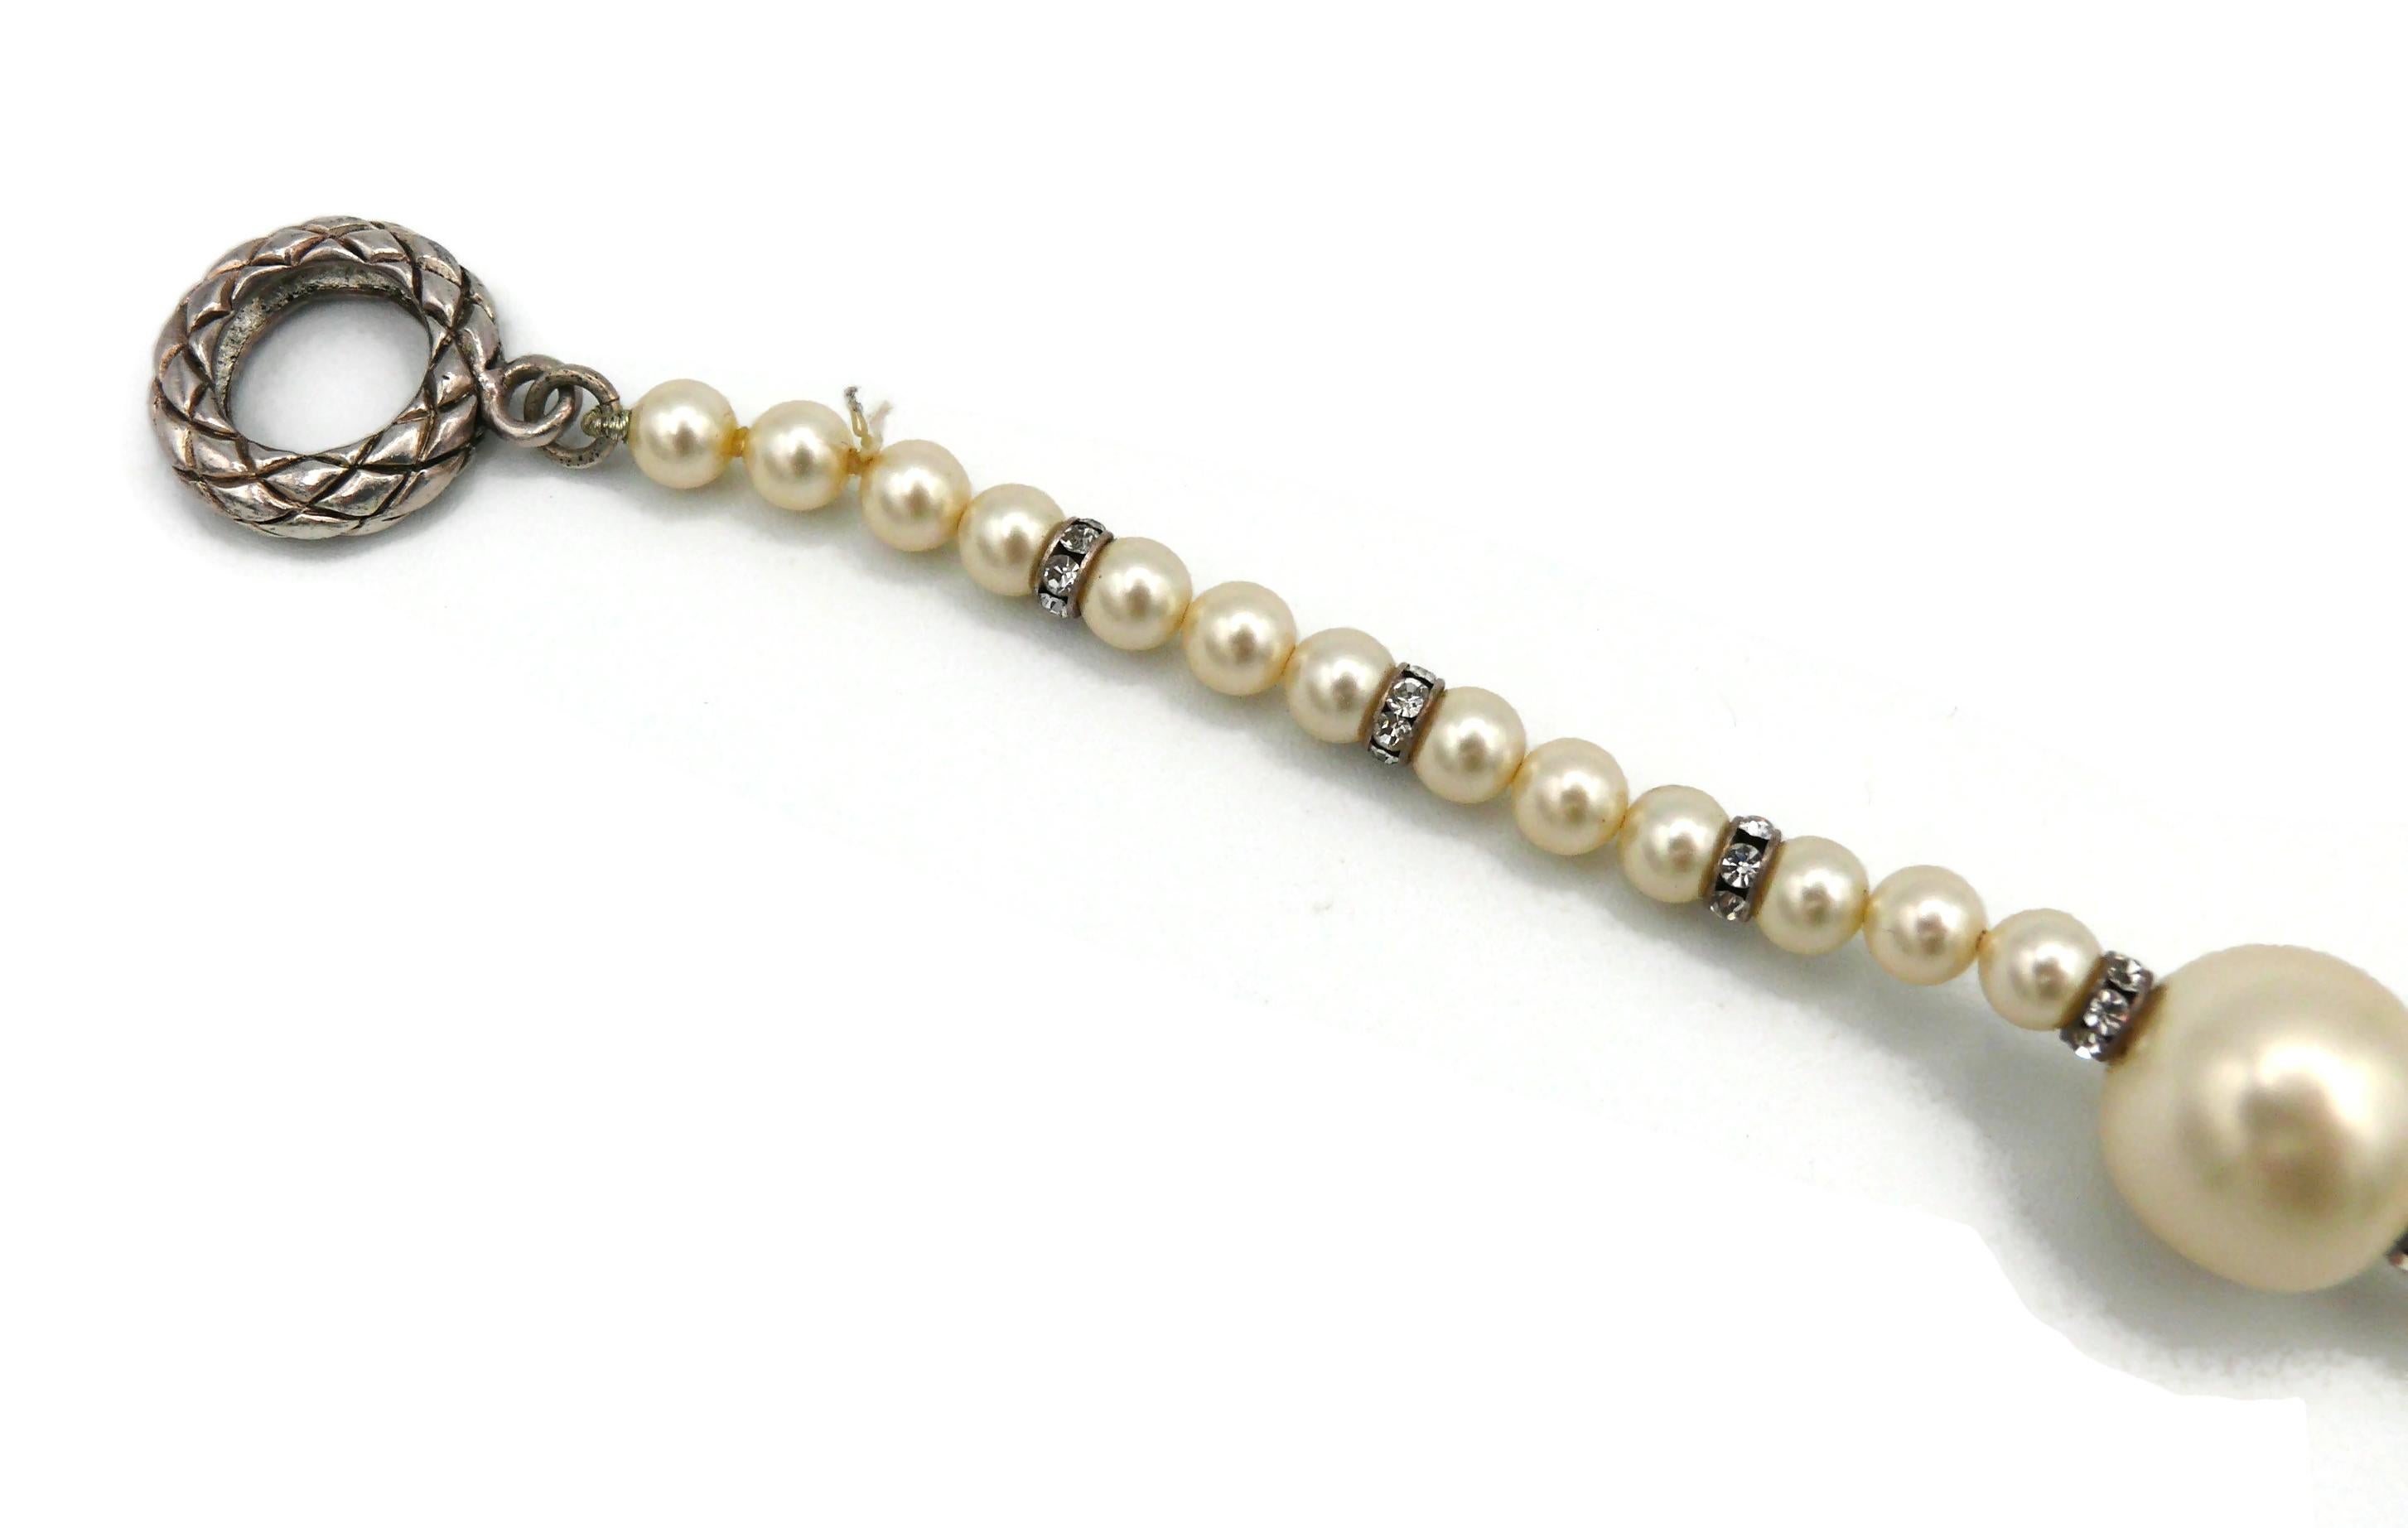 CHANEL by KARL LAGERFELD Vintage Faux Pearl and Crystal Necklace, Fall 1993 For Sale 1